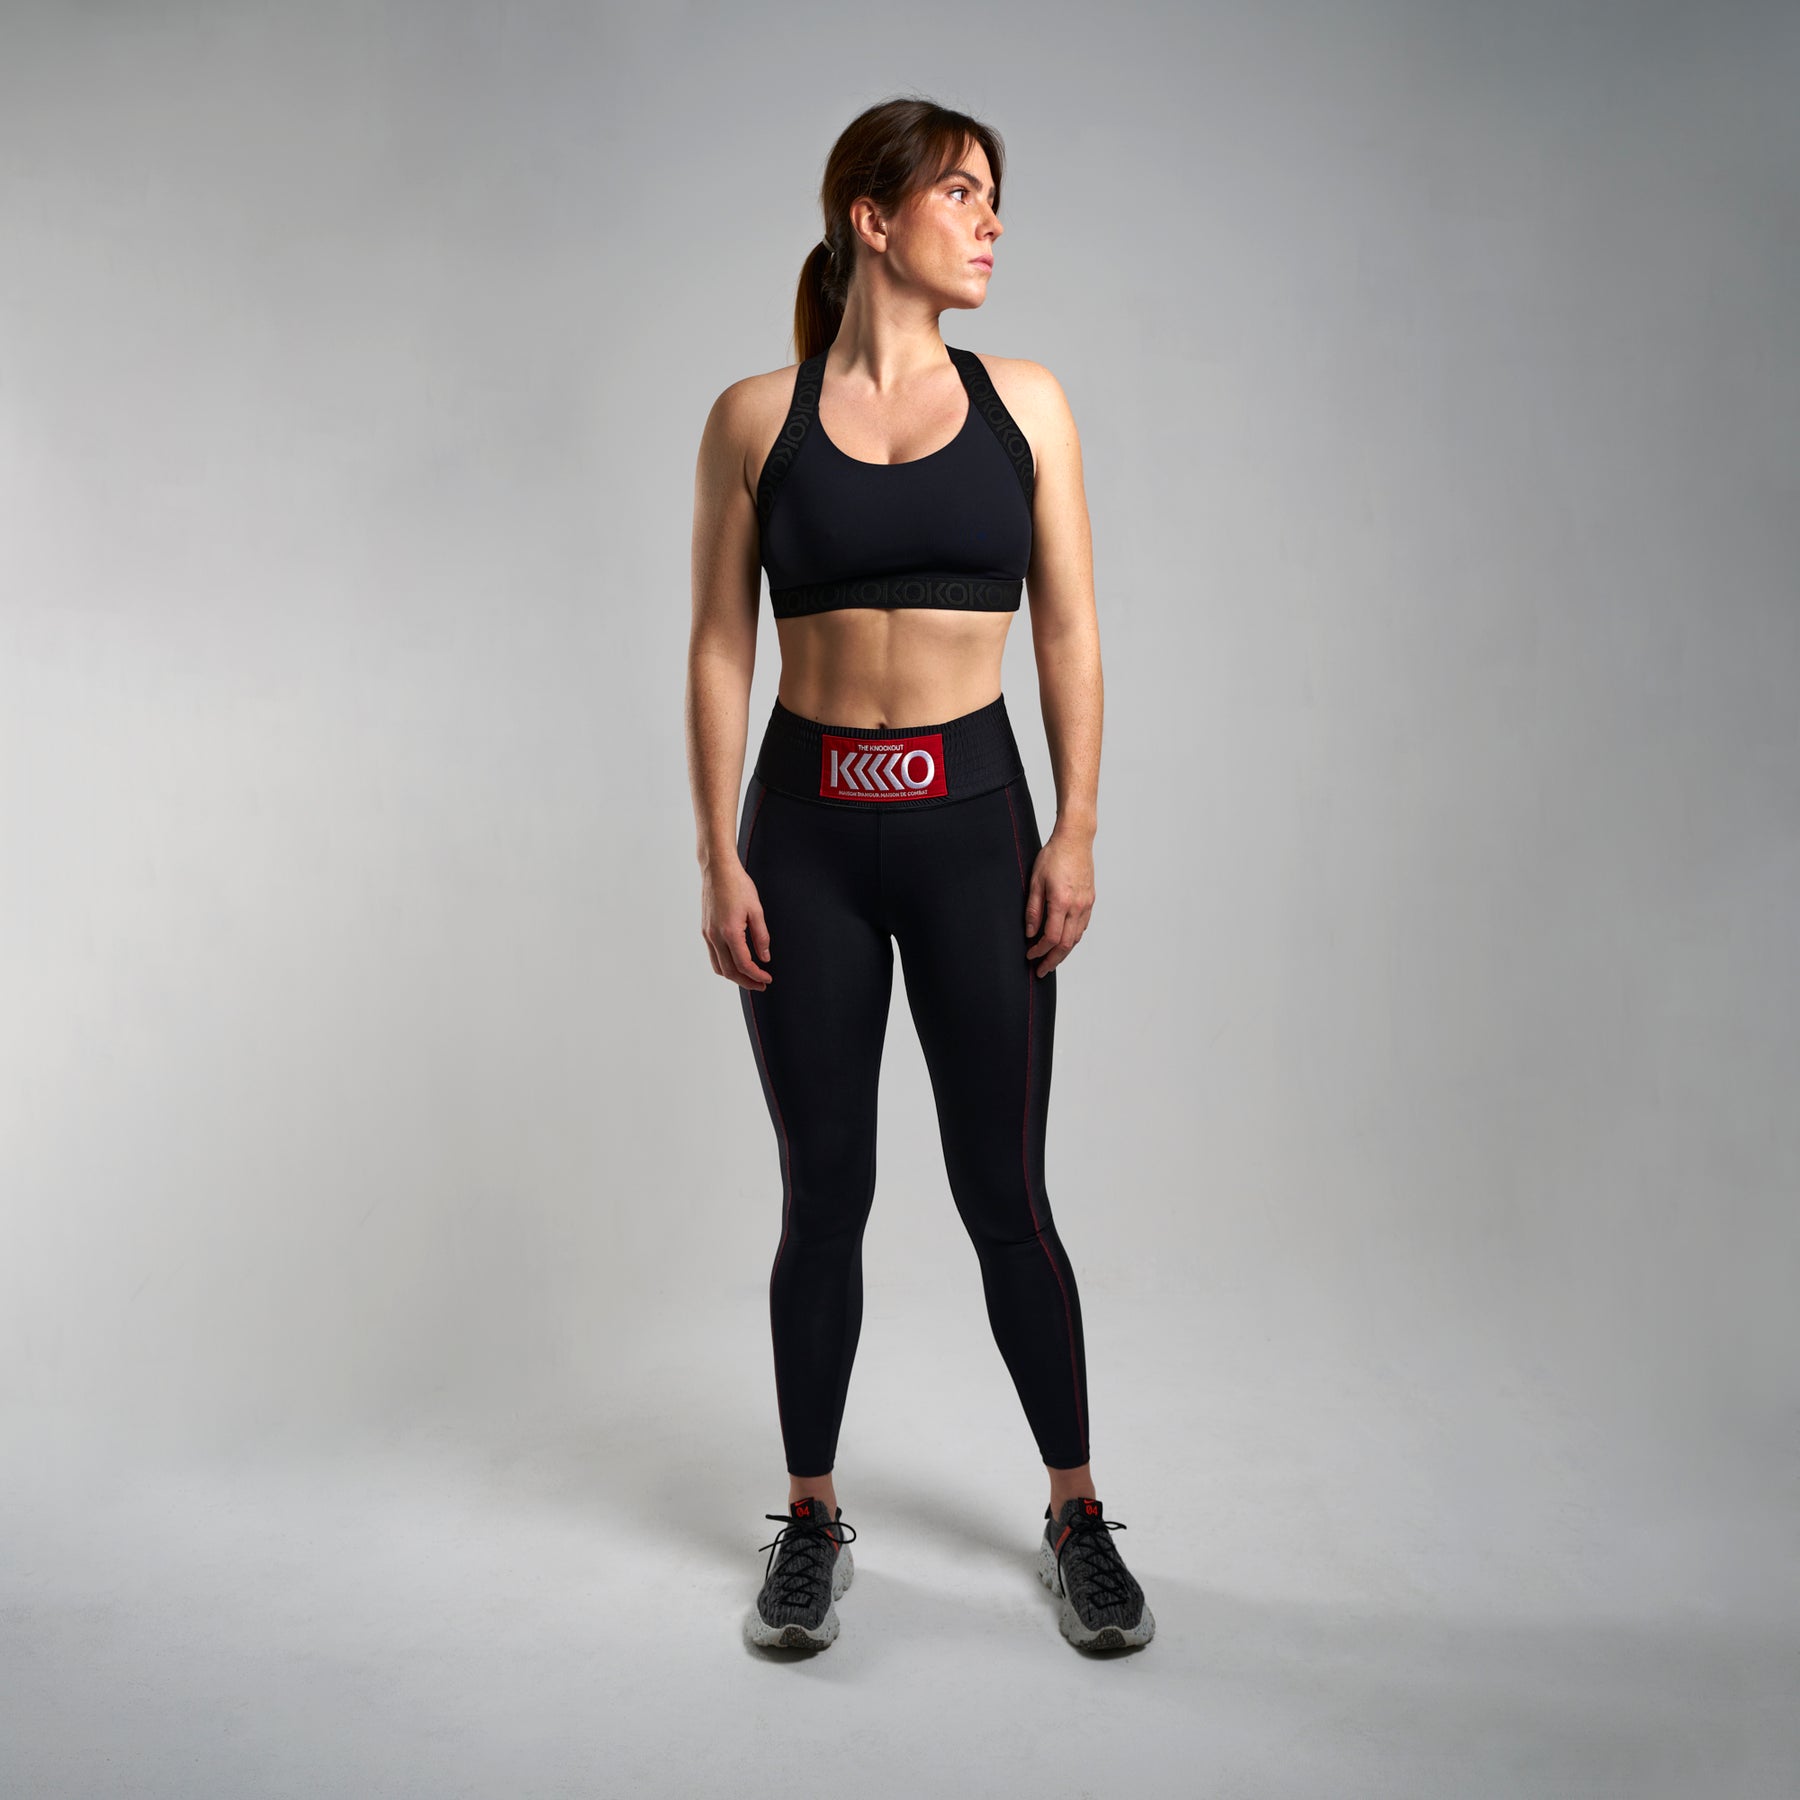 The Knockout Paris - Contender Sports Bra with medium support